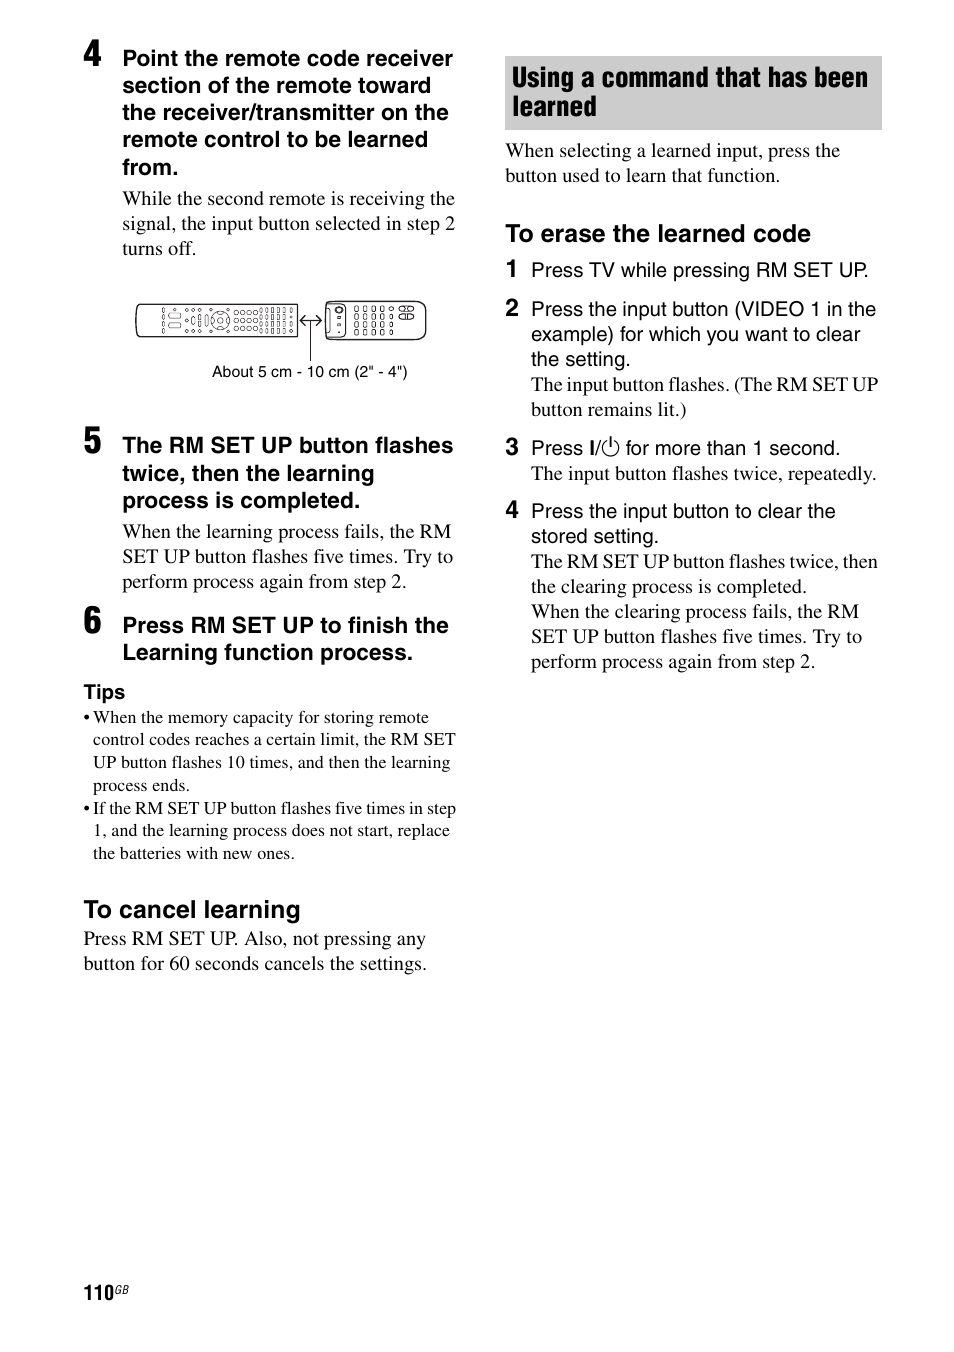 Using a command that has been learned | Sony STR-DG1000 User Manual | Page 110 / 123